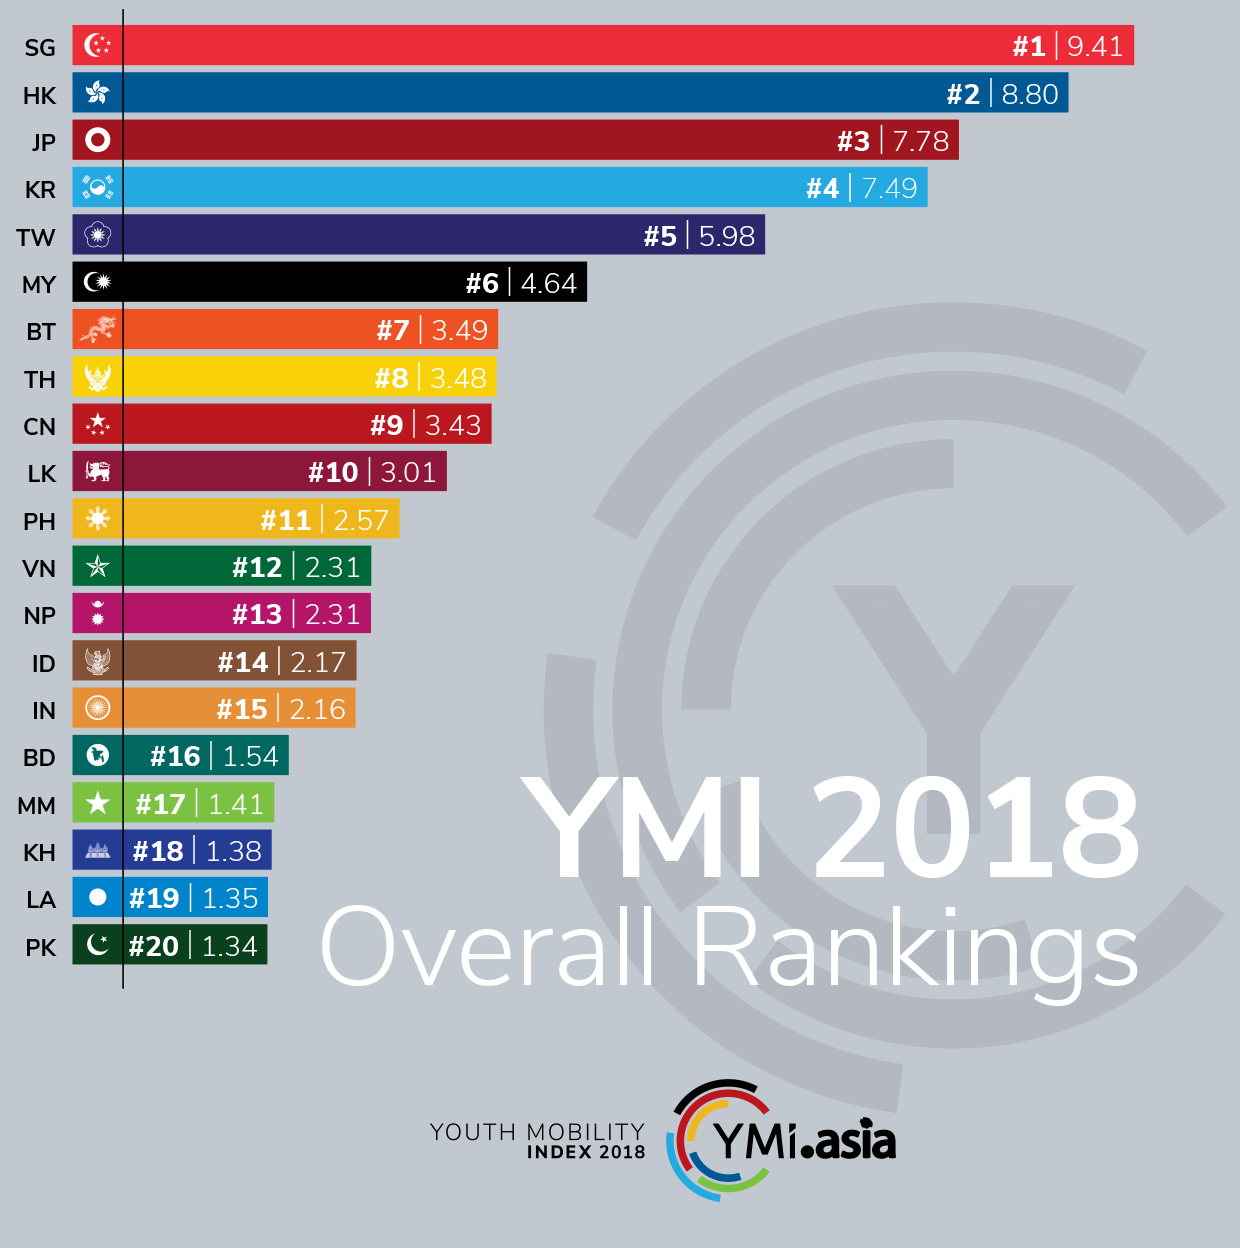 YMI 2018 Overall Rankings